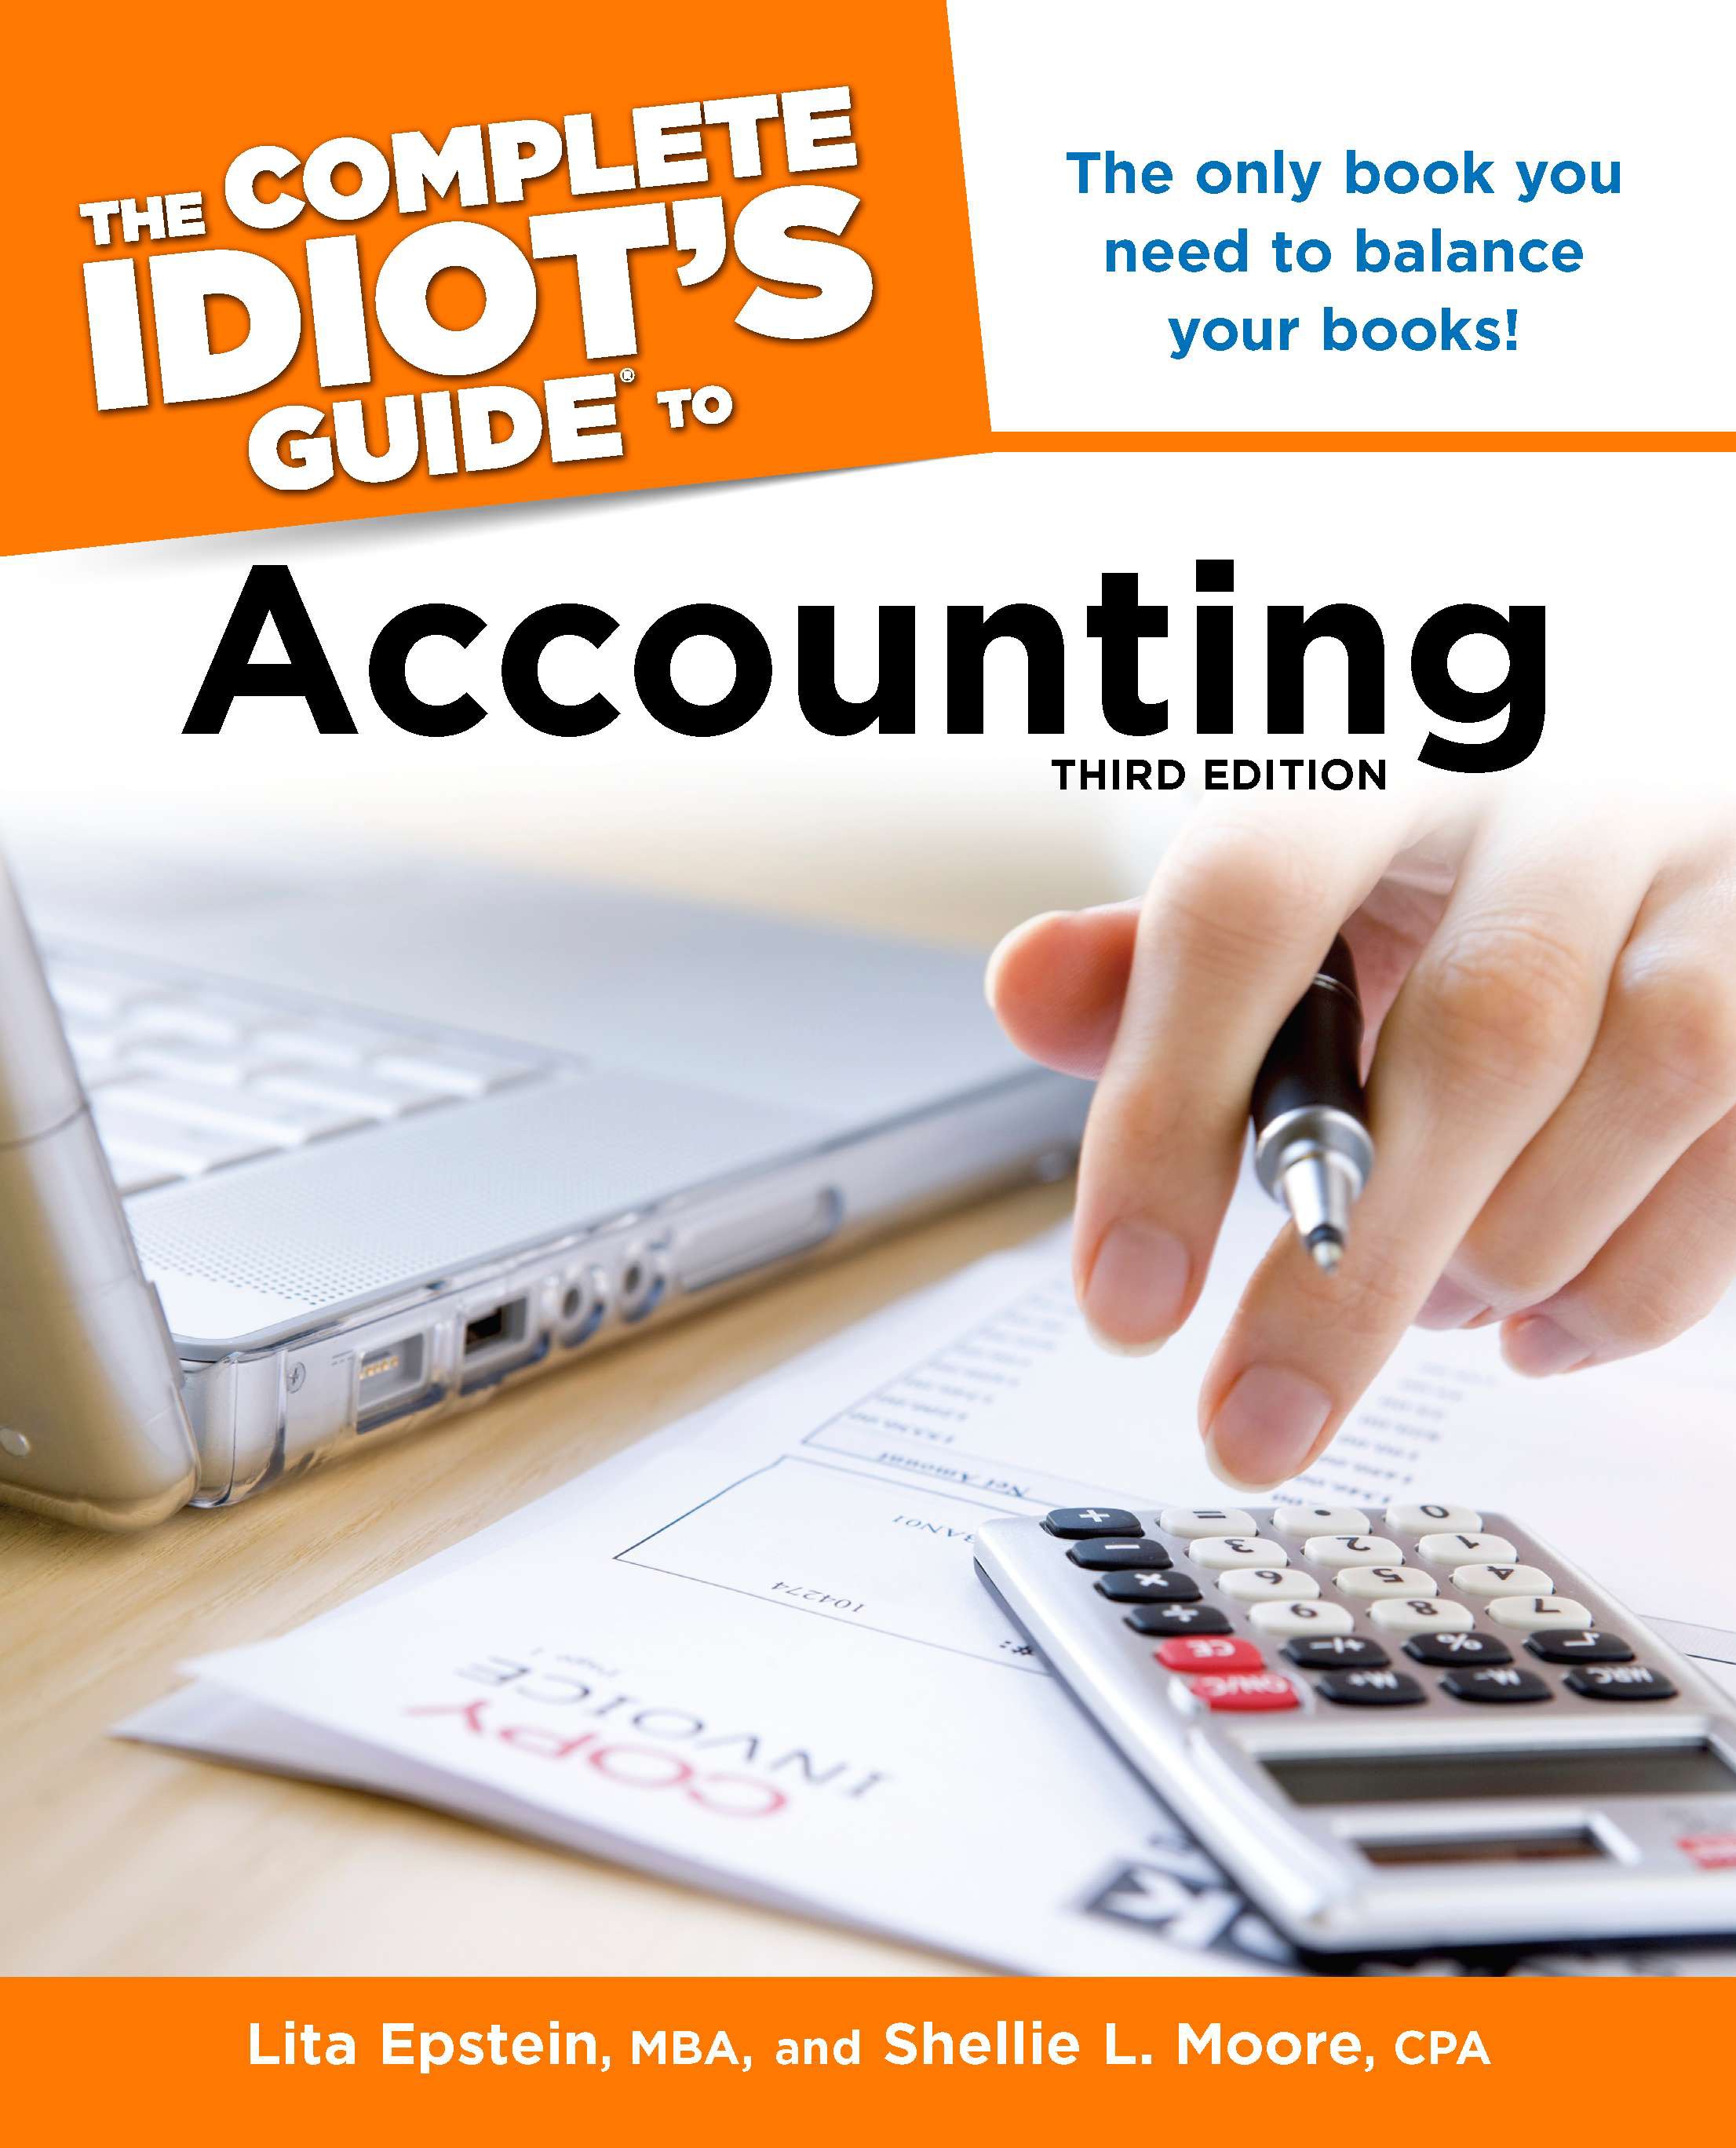 Accounting book. Complete MBA book. Accounting III учебник английского. The complete Idiot's Guide how to make money + book. The Idiots Guide books poster.